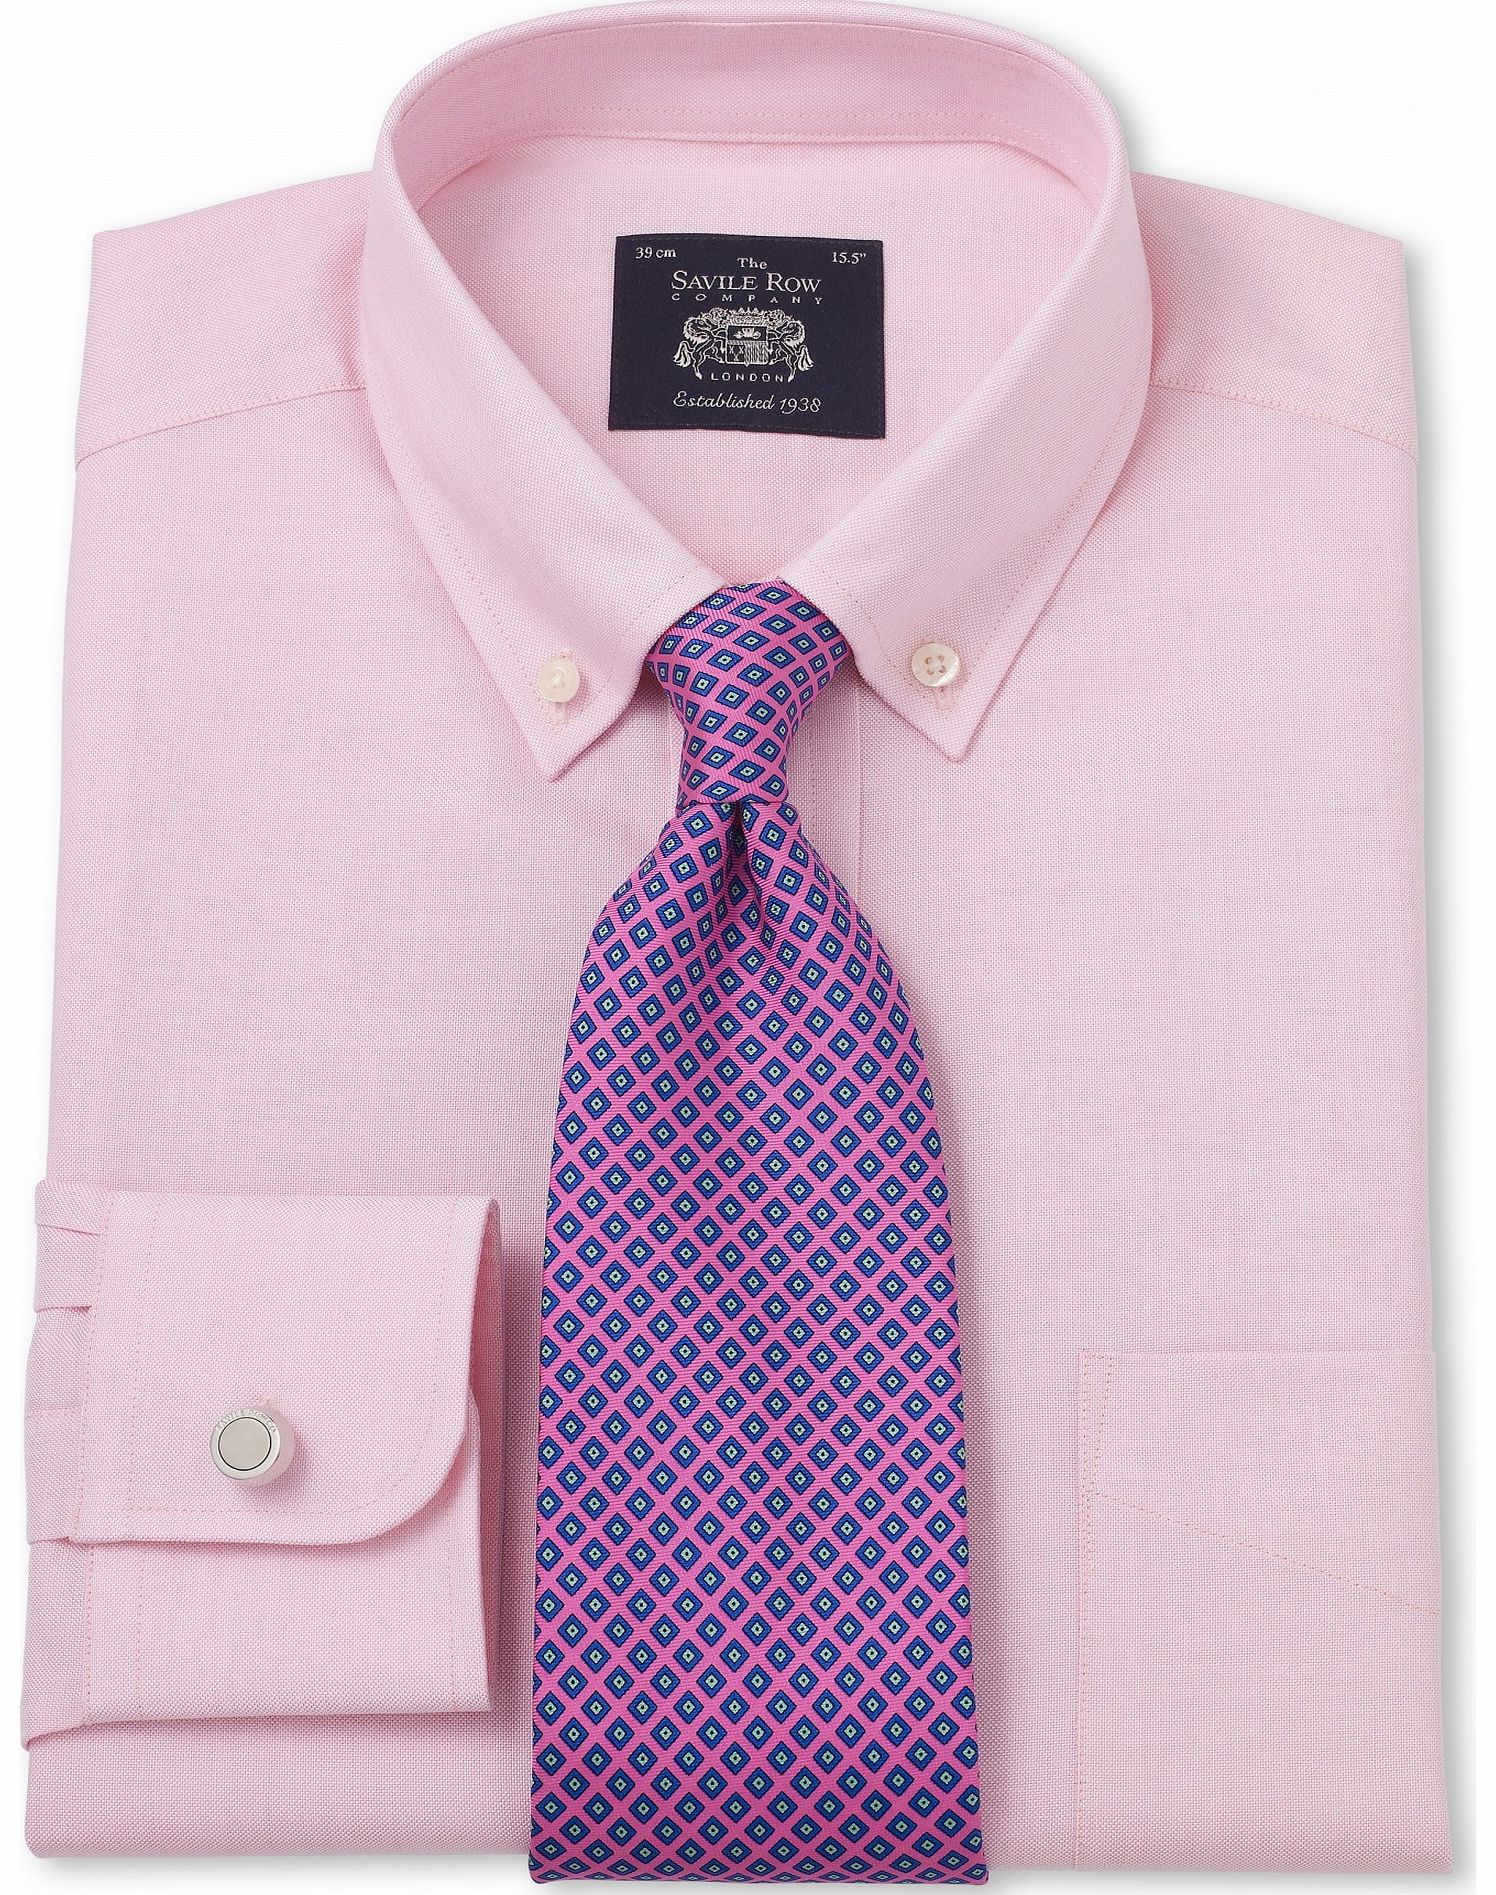 Savile Row Company Pink Pinpoint Classic Fit Shirt 18`` Lengthened